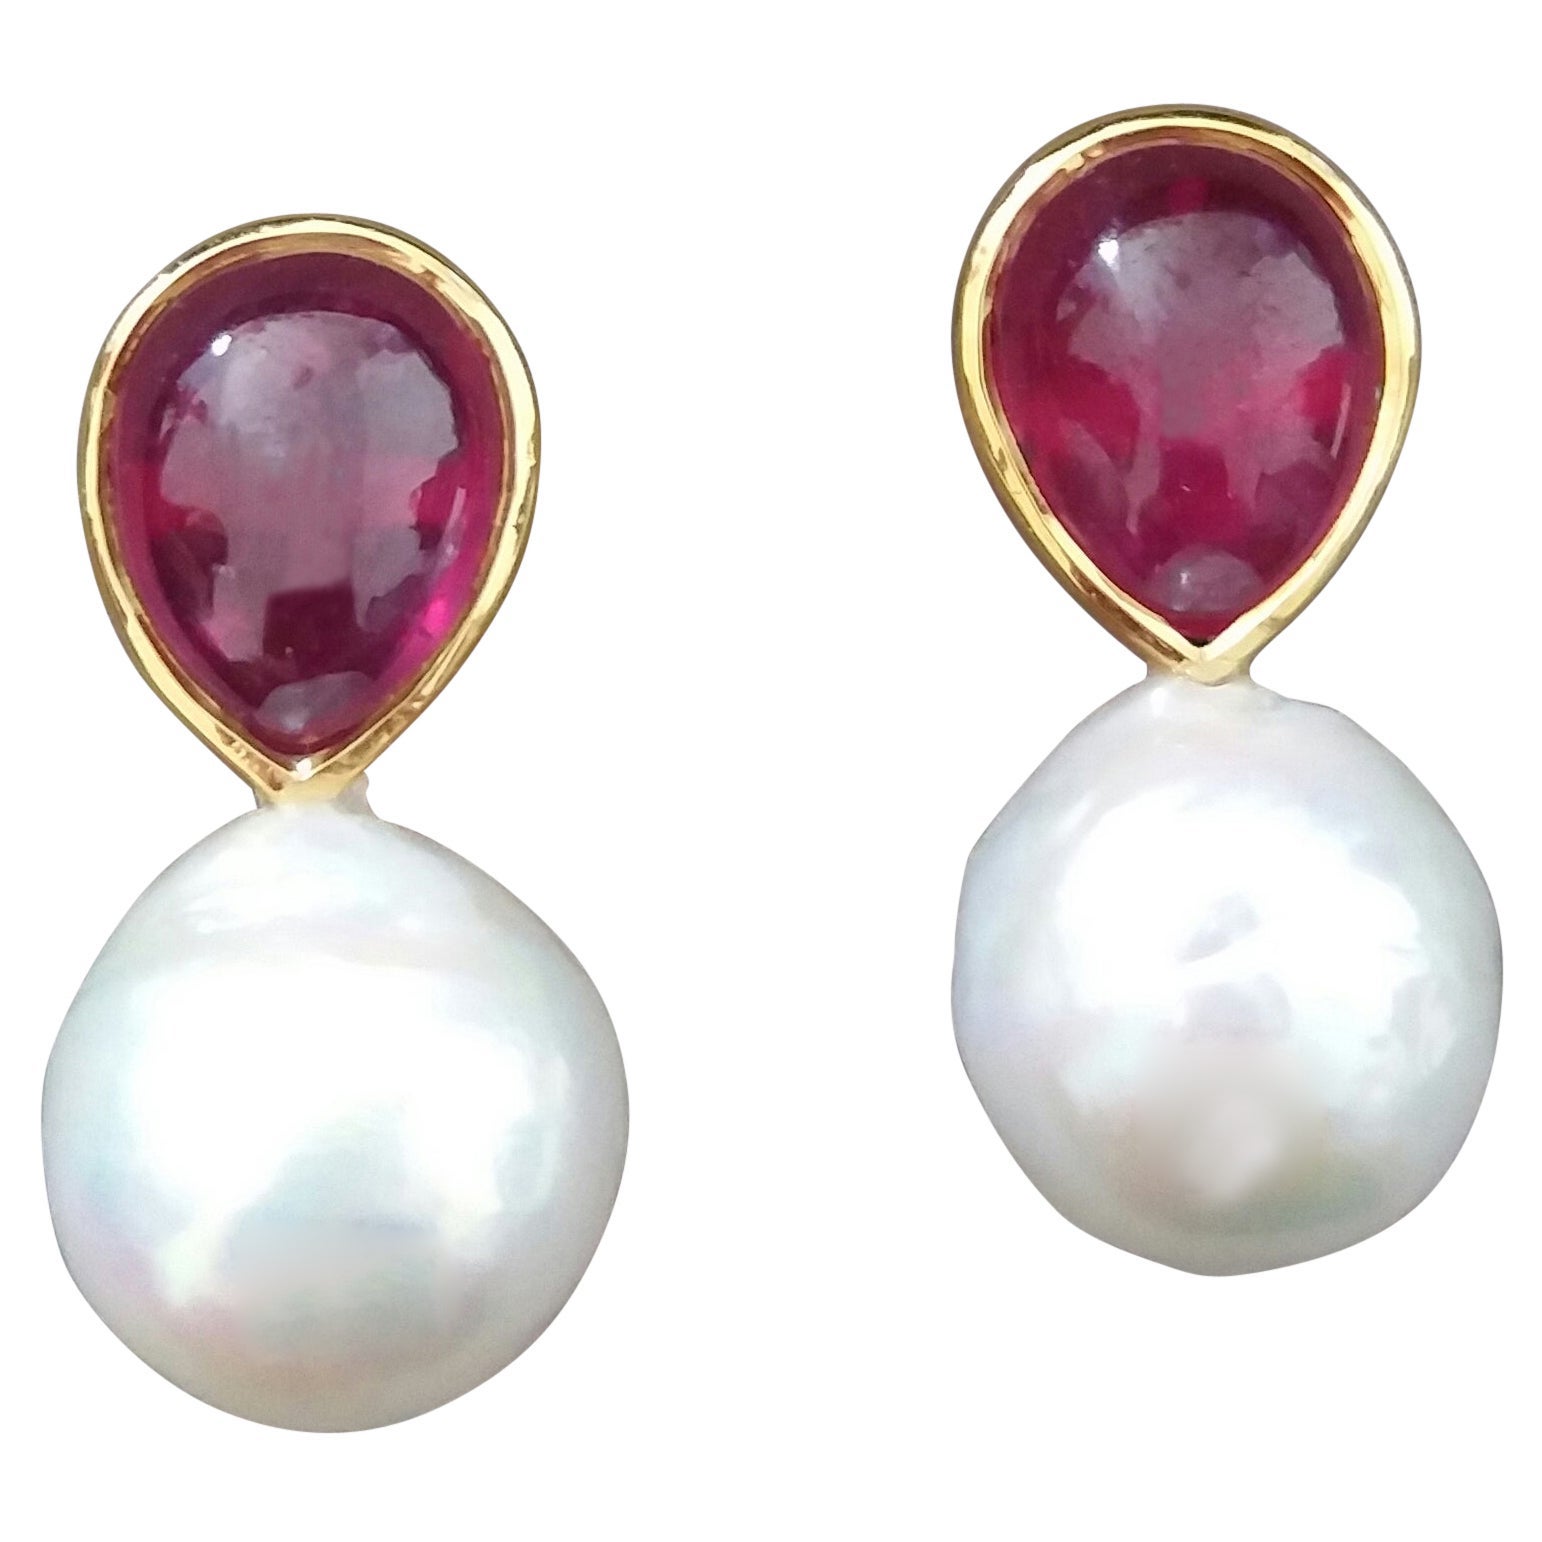 White Baroque Pearls Pear Shape Ruby Cabs 14 Kt Yellow Gold Bezel Stud Earrings